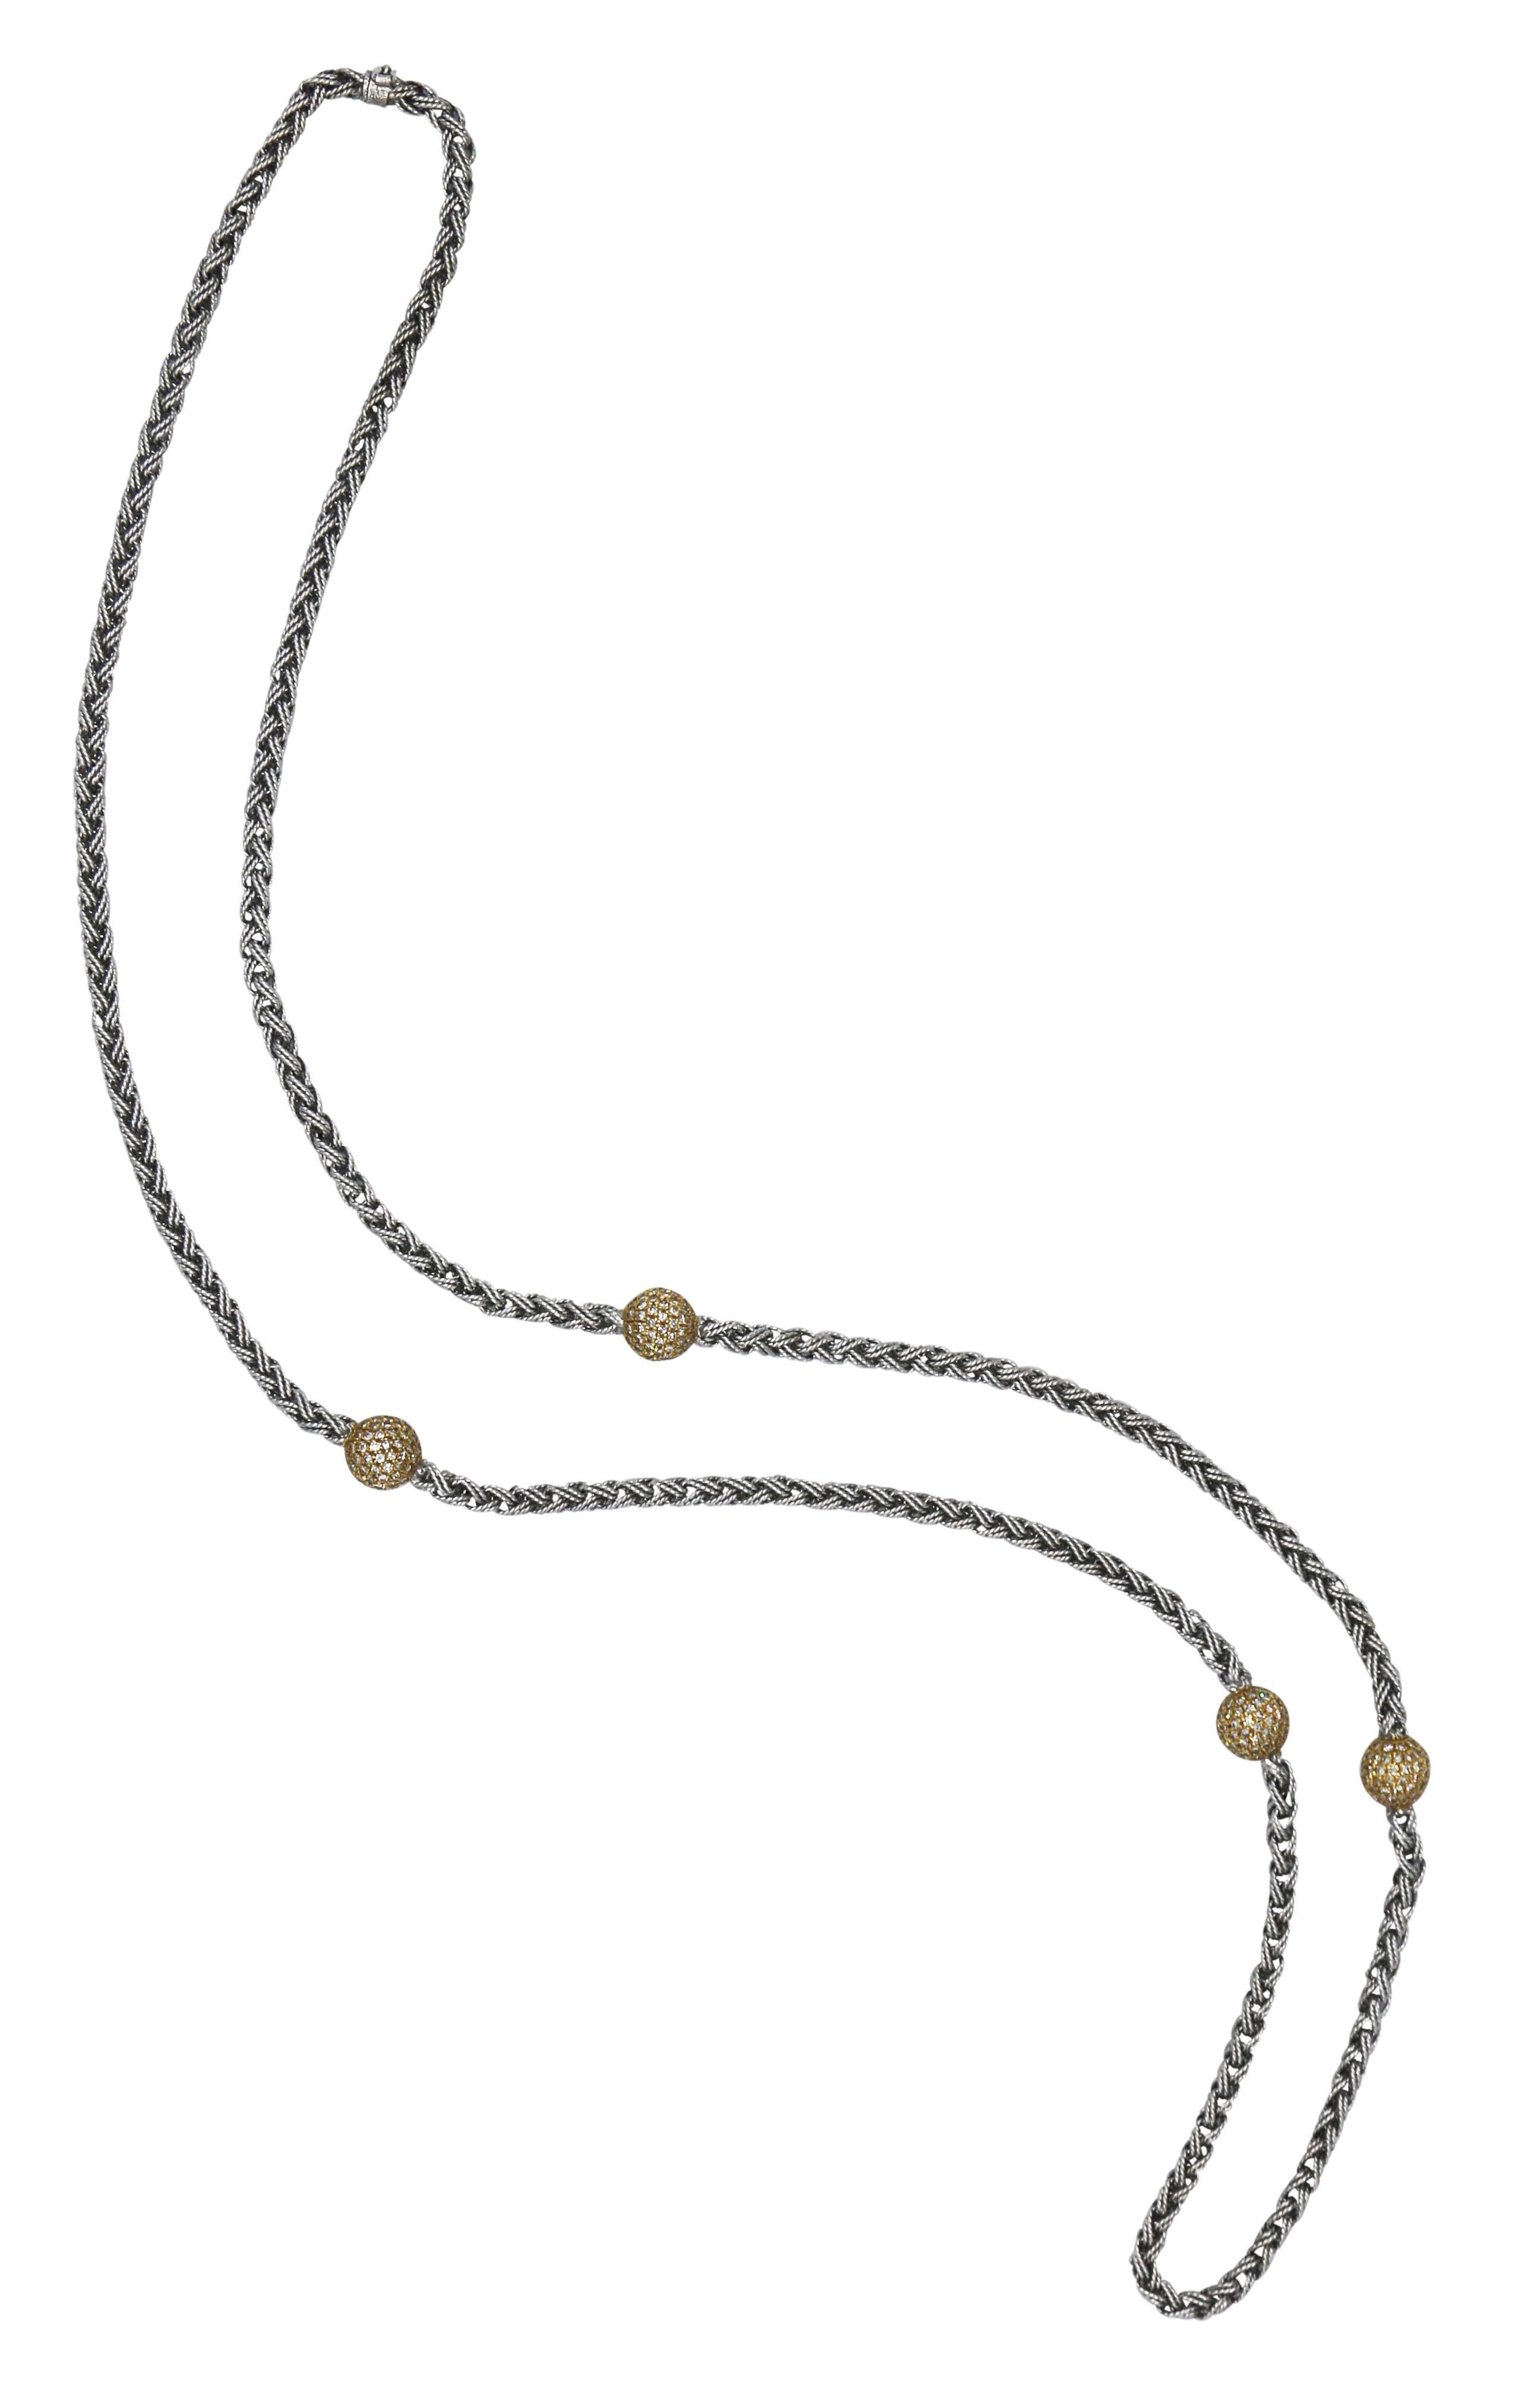 18 karat two-tone gold and diamond necklace, designed as a white gold longchain composed of a highly flexible circular chain spaced by yellow gold rondelles set with round diamonds weighing approximately 5.00 carats, gross weight 103.4 grams, length